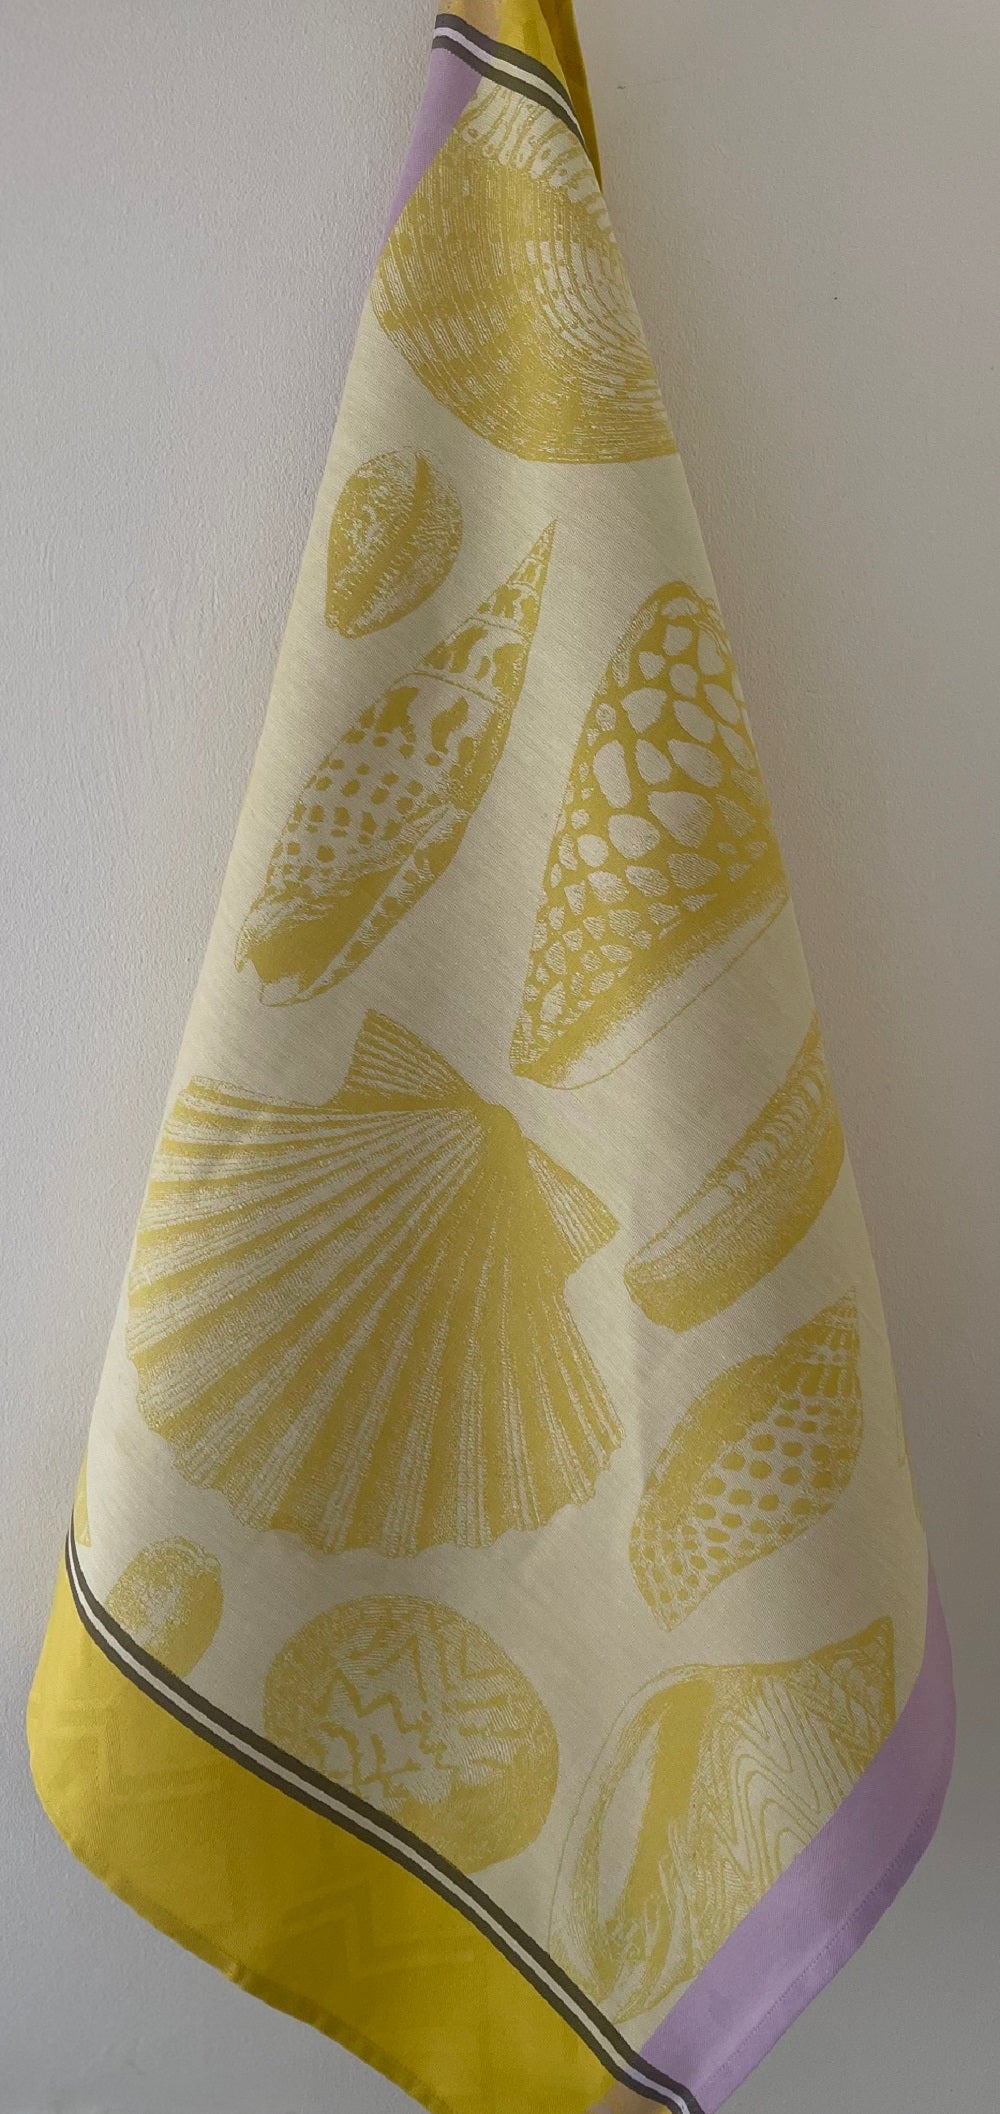 Jacquard Francais "Coquillages" (Soleil), Woven cotton tea towel. Made in France.